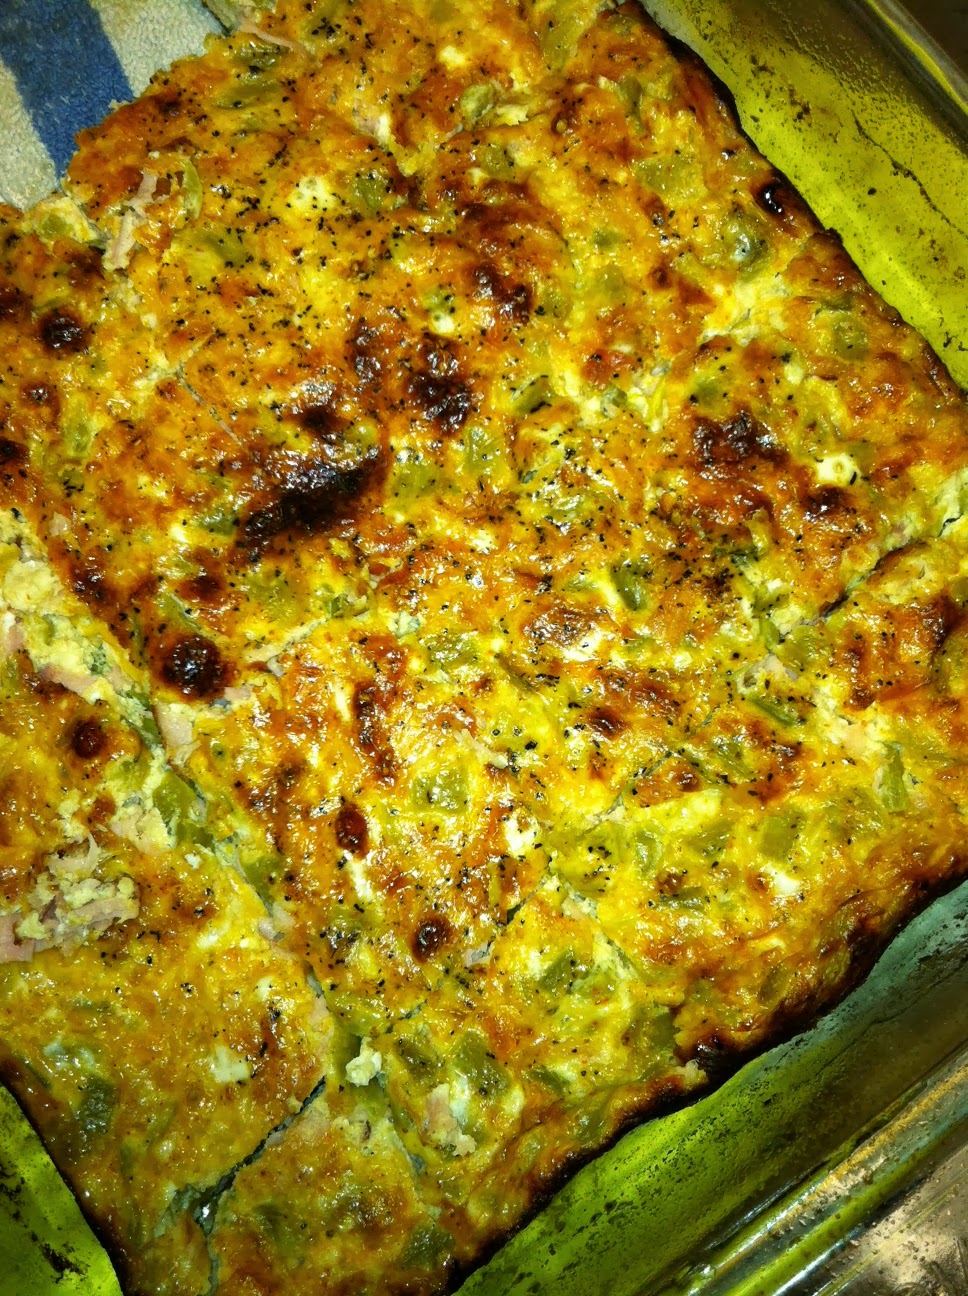 The Ranch Kitchen: Green Chili Sausage and Egg Casserole